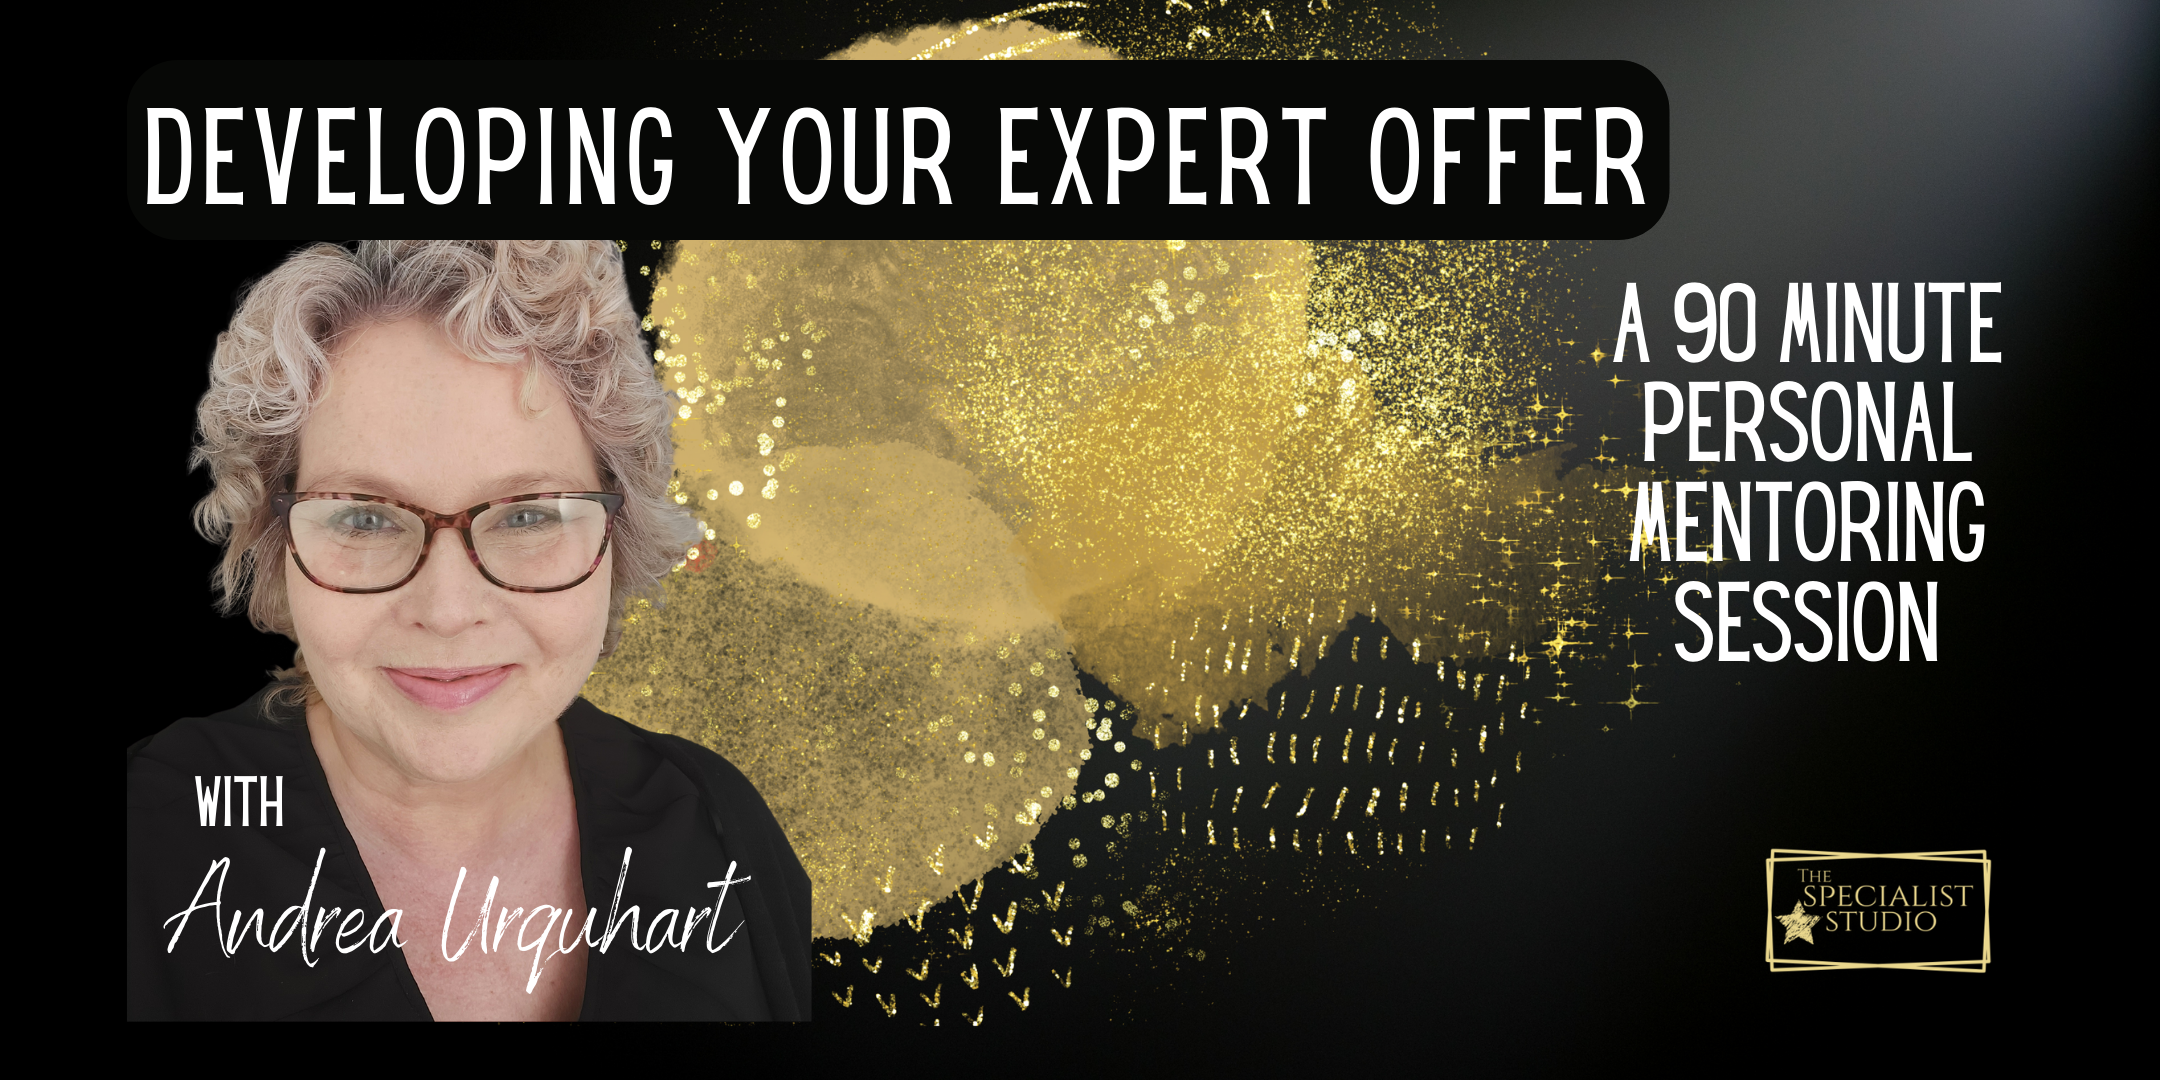 An image of Andrea Urquhart business mentor for coaches and therapists, and text advertising a 1:1 mentoring service called developing your expert offer